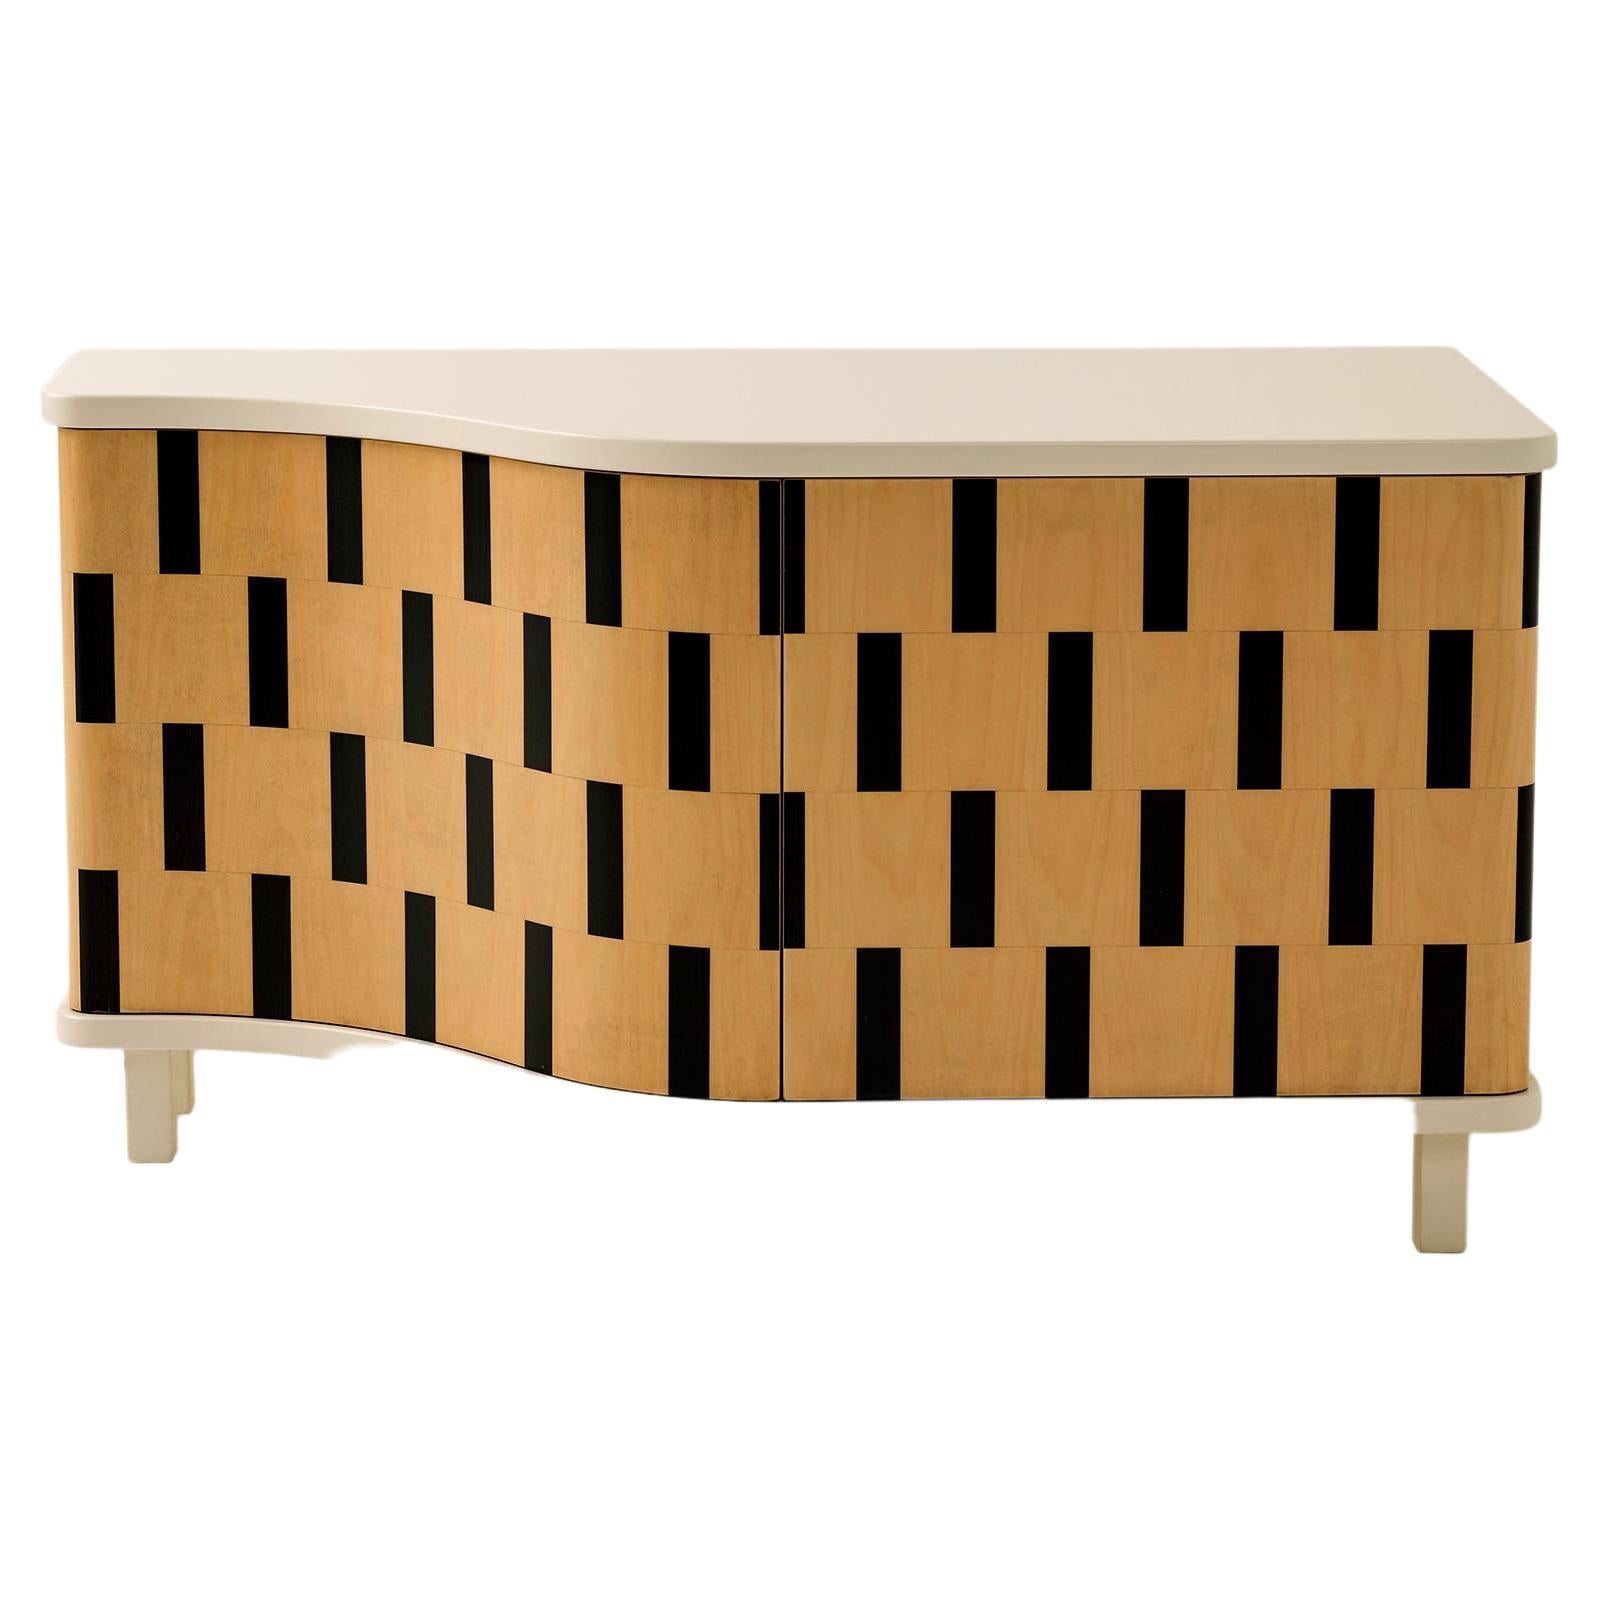 Rayas Black & White Striped Credenza with Wooden Marquetry For Sale